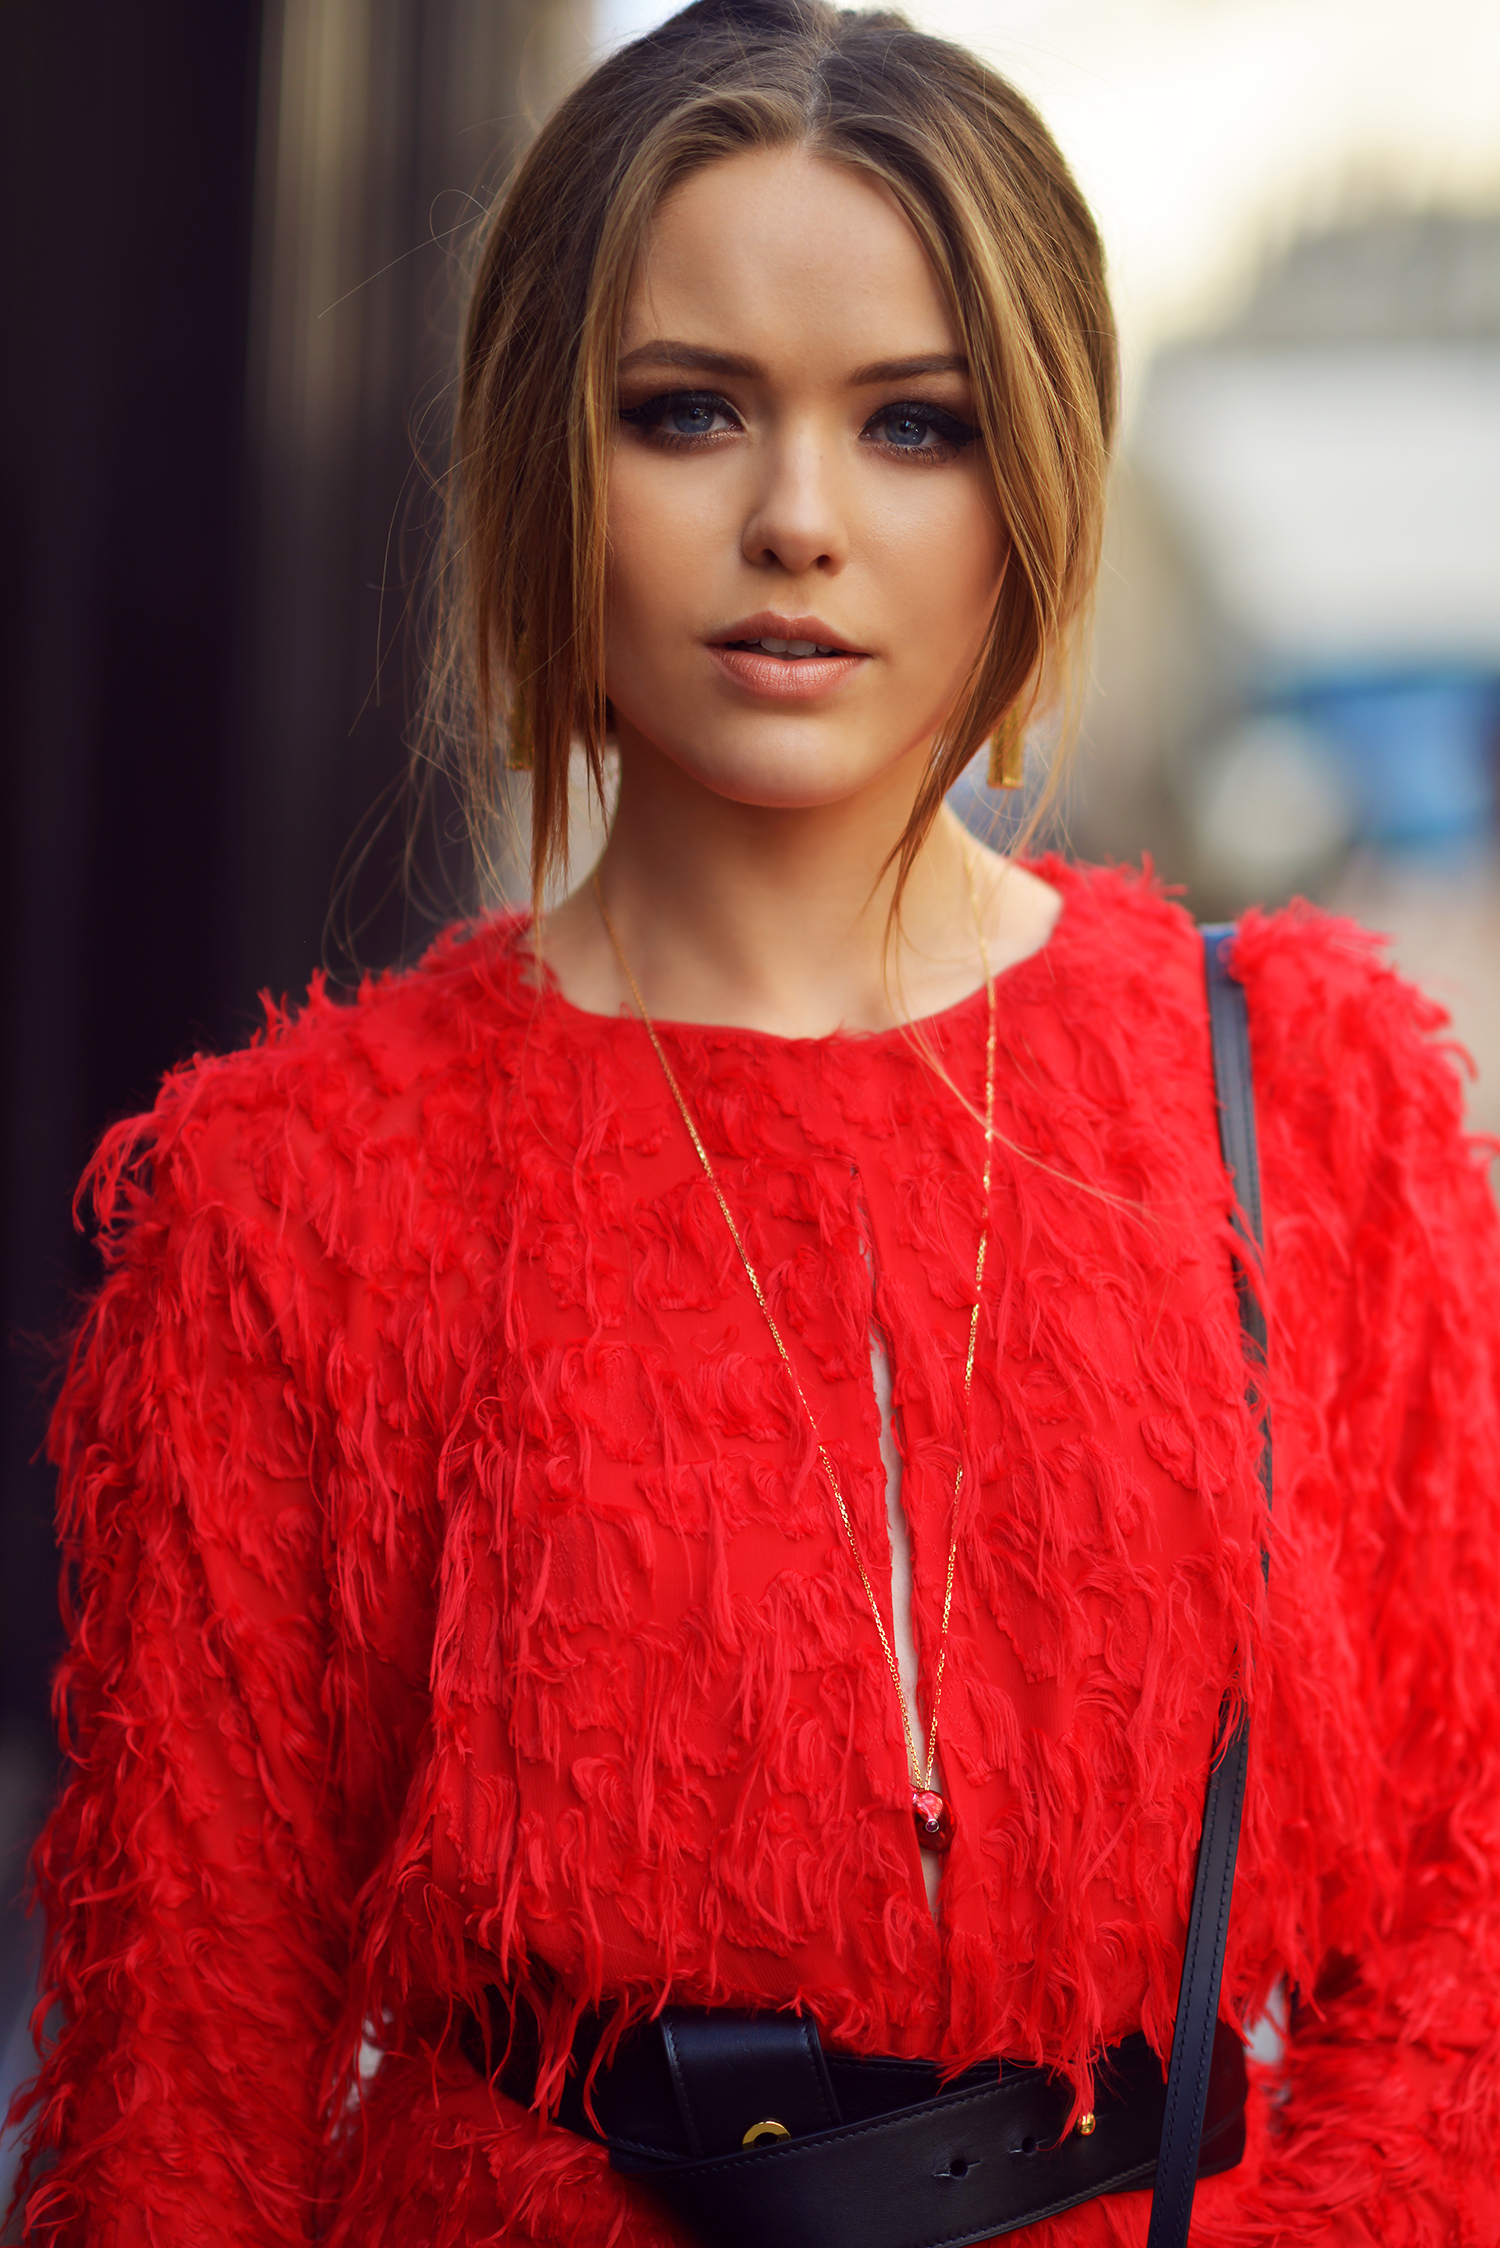 Kayture – THE GIRL IN THE RED DRESS